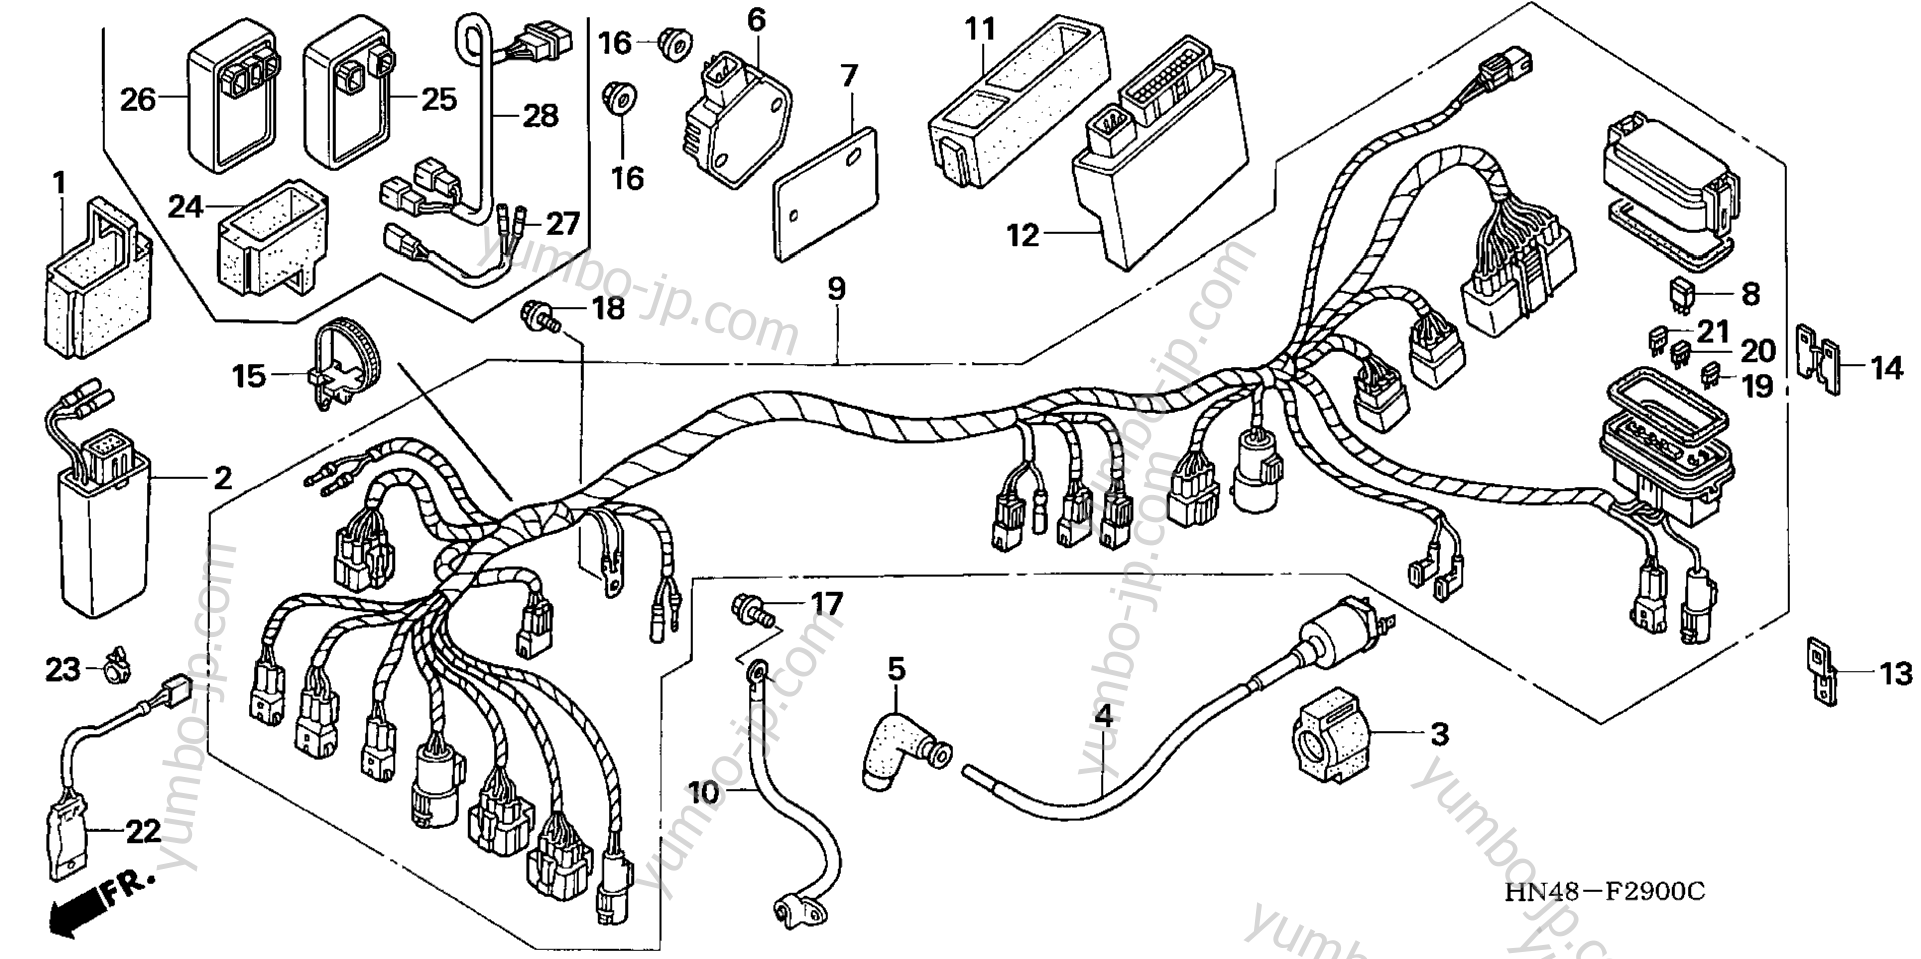 WIRE HARNESS for ATVs HONDA TRX350TE A 2004 year